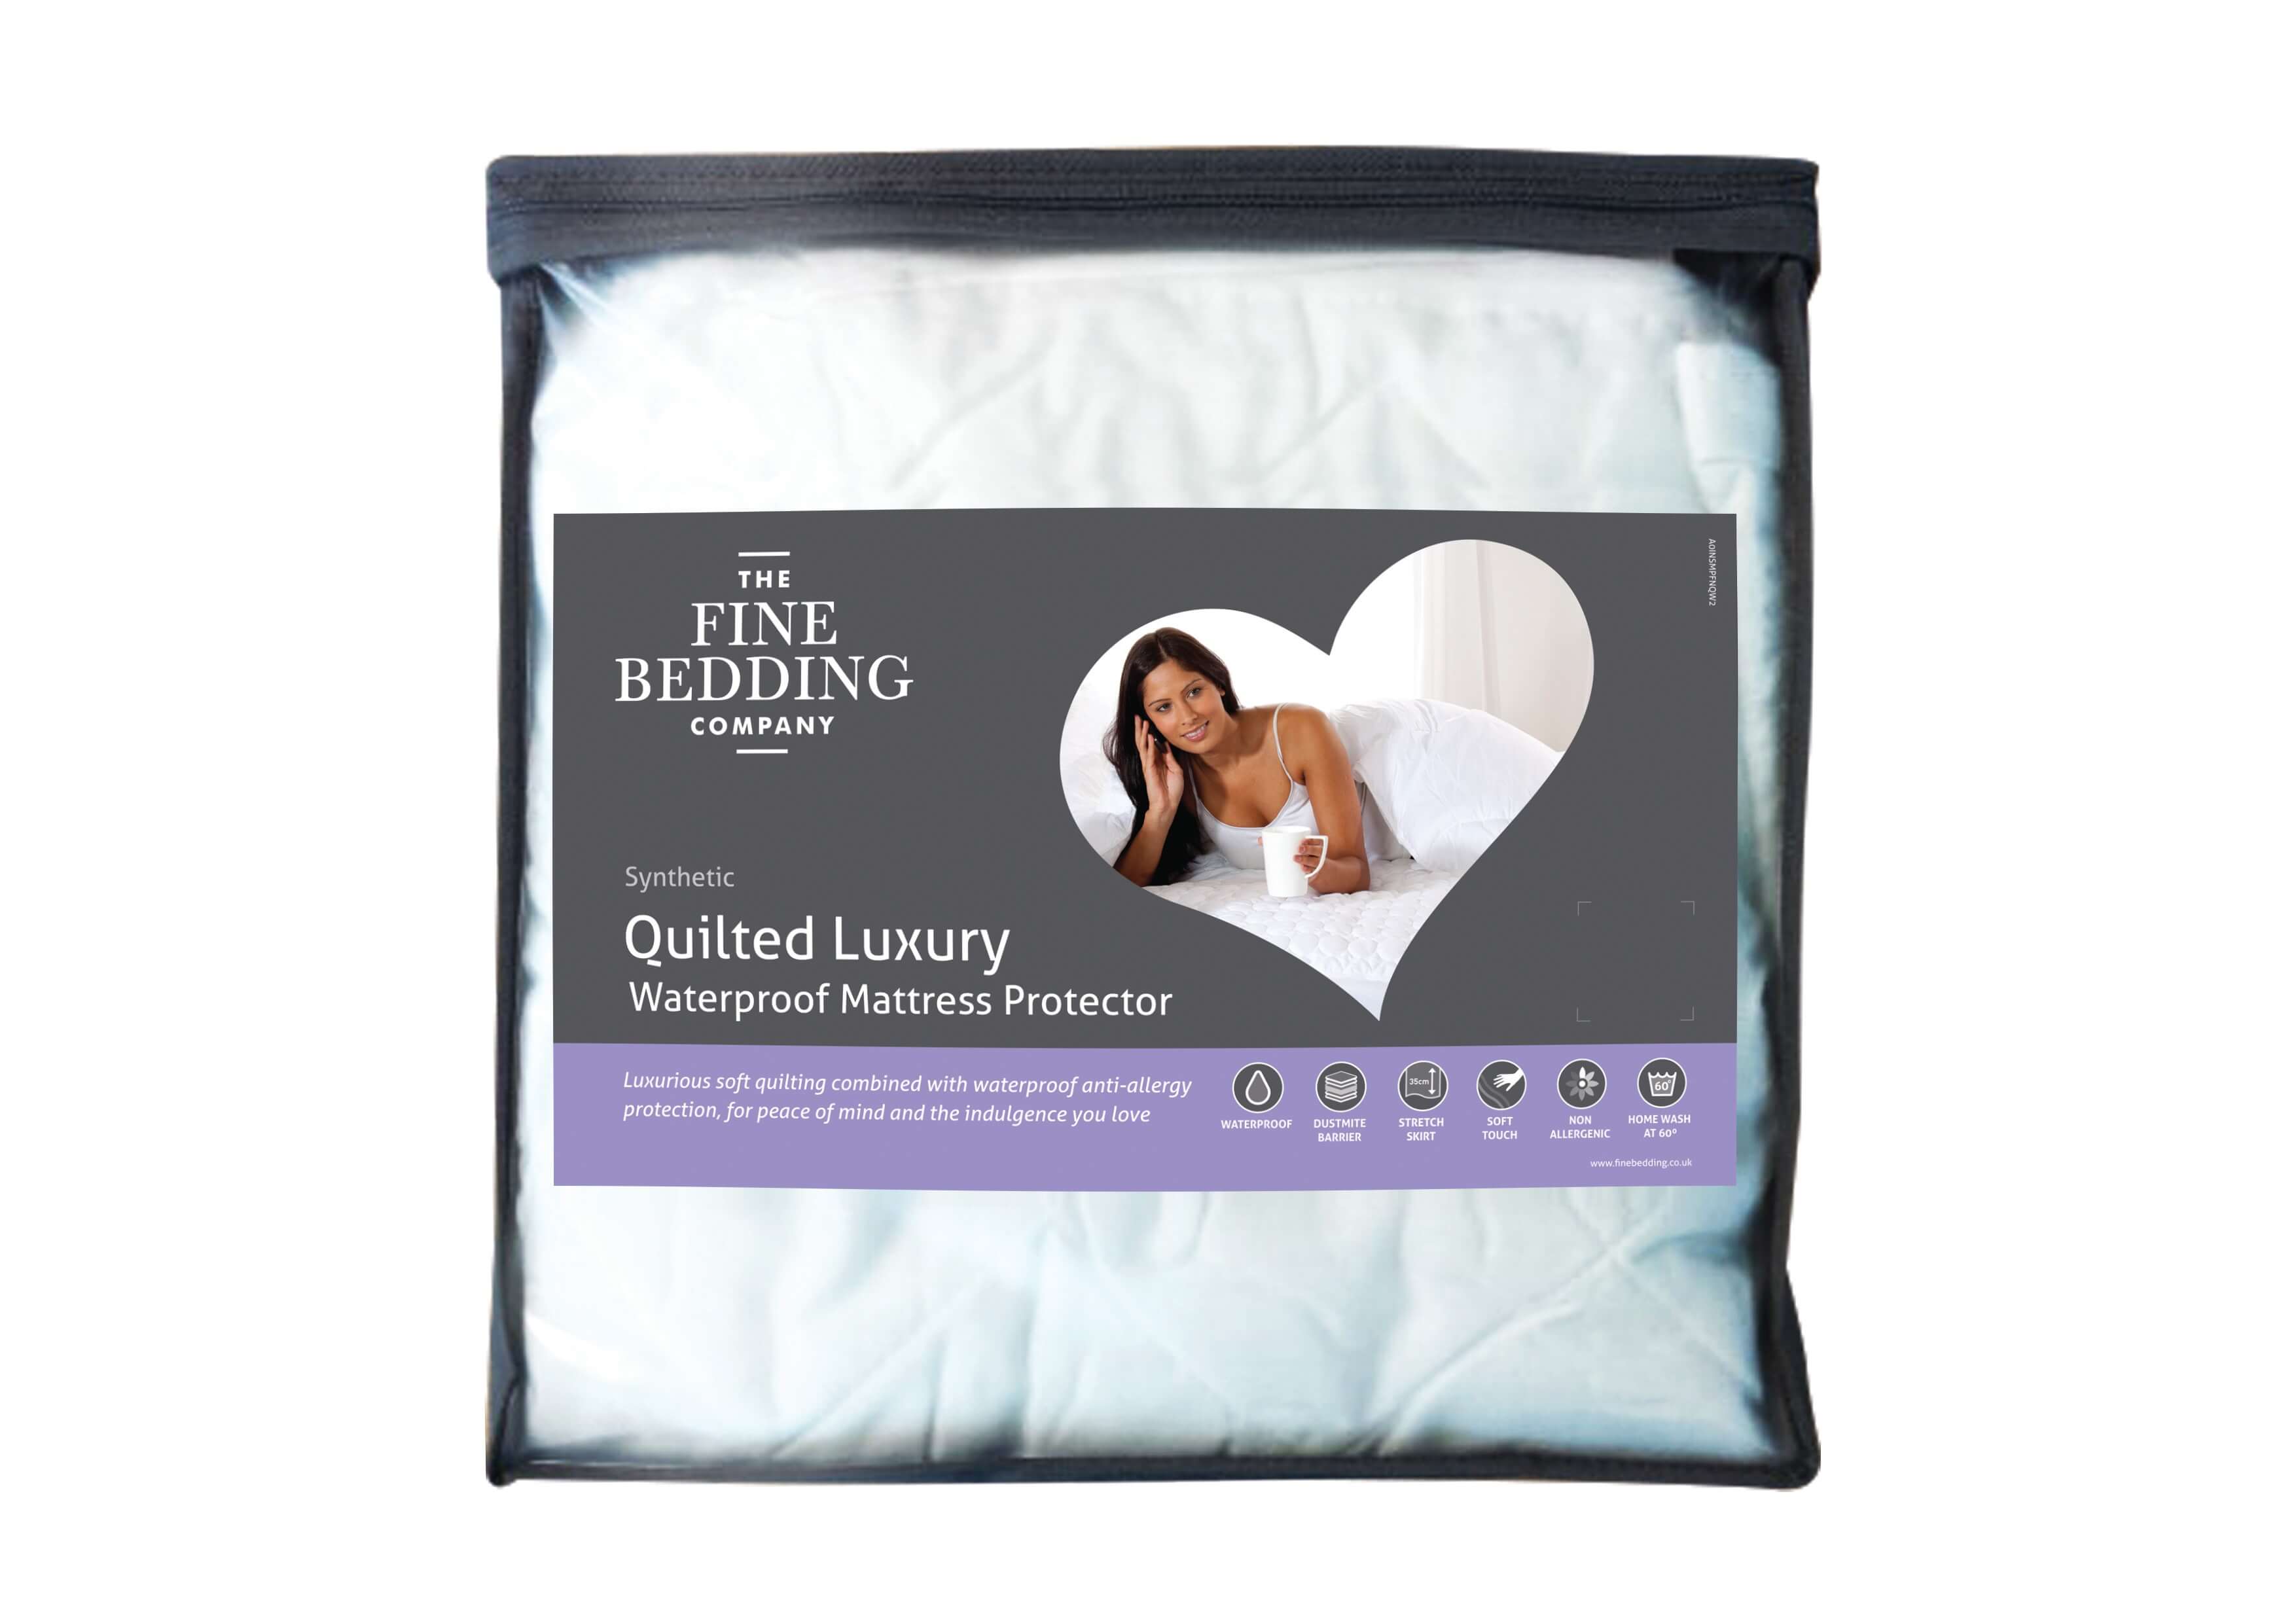 Quilted Luxury Waterproof Mattress Protector - The Fine Bedding Company